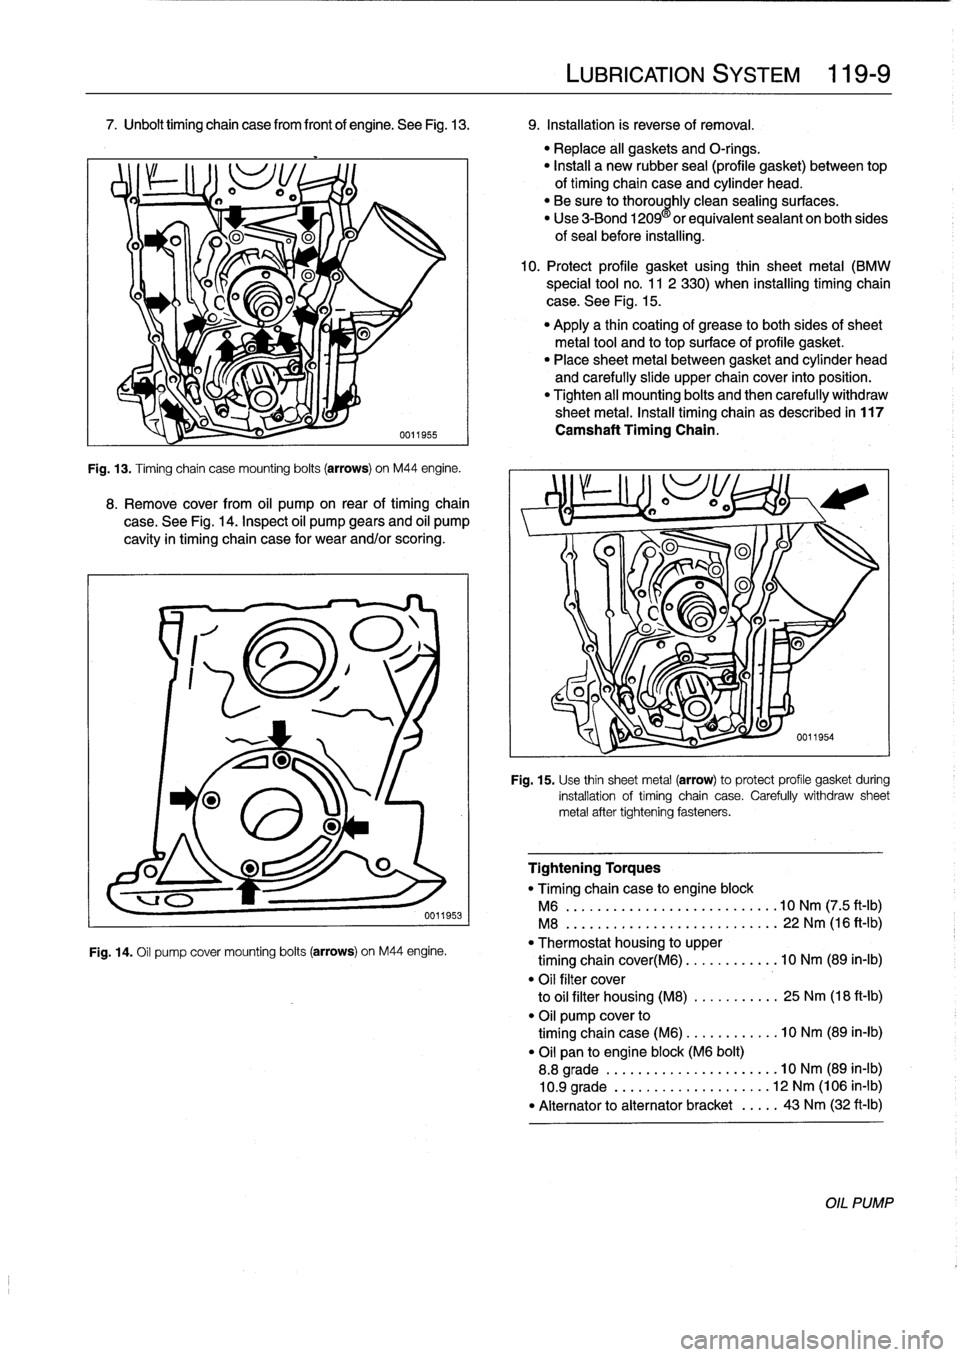 BMW 328i 1995 E36 User Guide 7
.
Unbolt
timing
chain
casefrom
frontof
engine
.
See
Fig
.
13
.

	

9
.
Installation
is
reverse
of
removal
.

Fig
.
13
.
Timing
chain
case
mounting
bolts
(arrows)
on
M44
engine
.

8
.
Remove
cover
fr